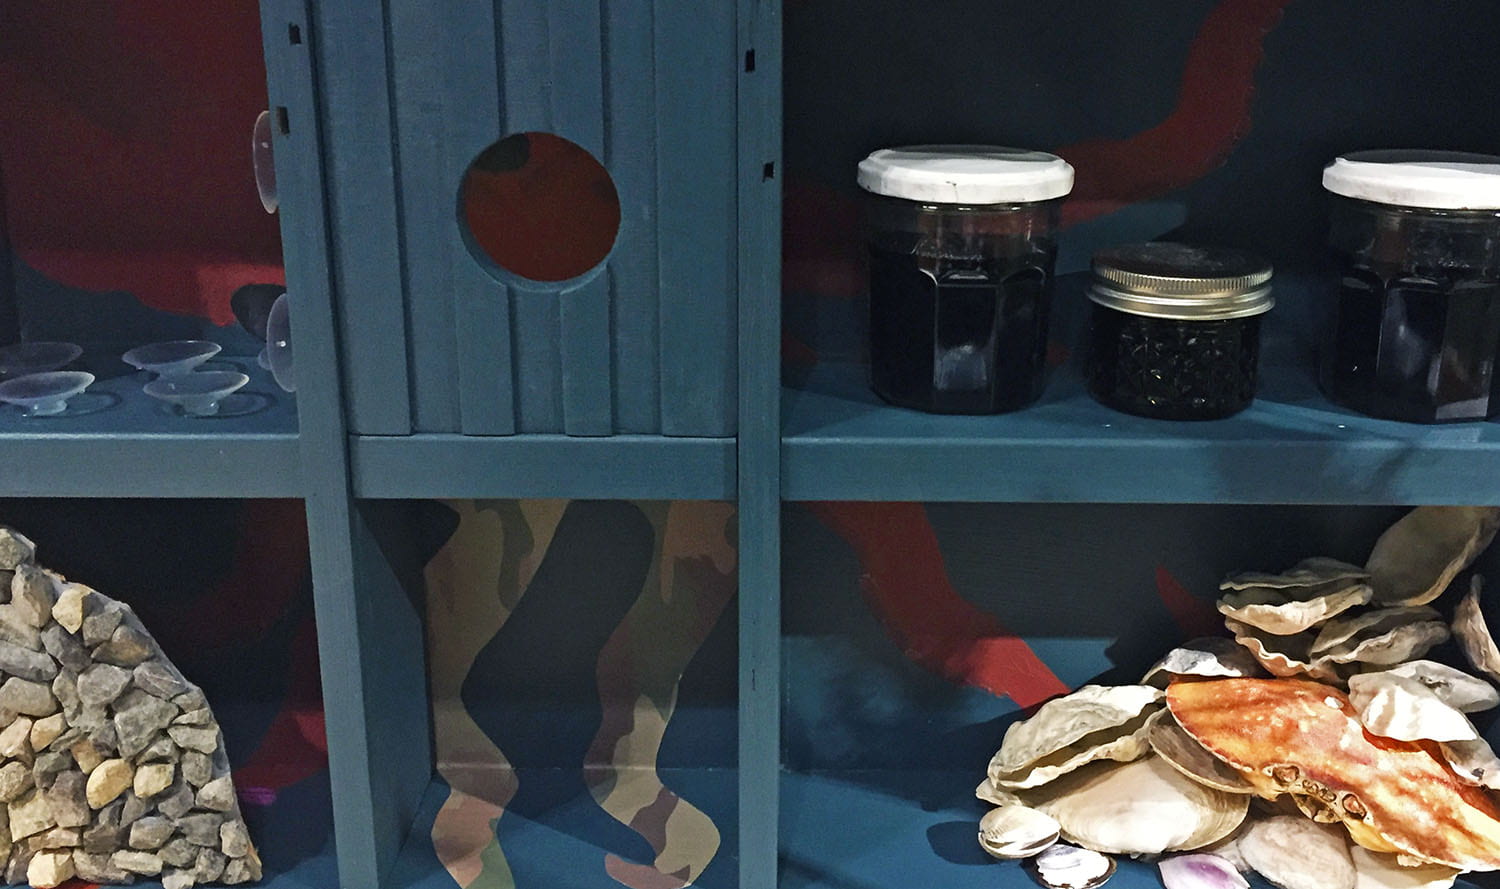 shelf cubbies containing: plastic sticky feet, jars filled with black liquid, a bag of rocks, and oyster, clam and crab shells